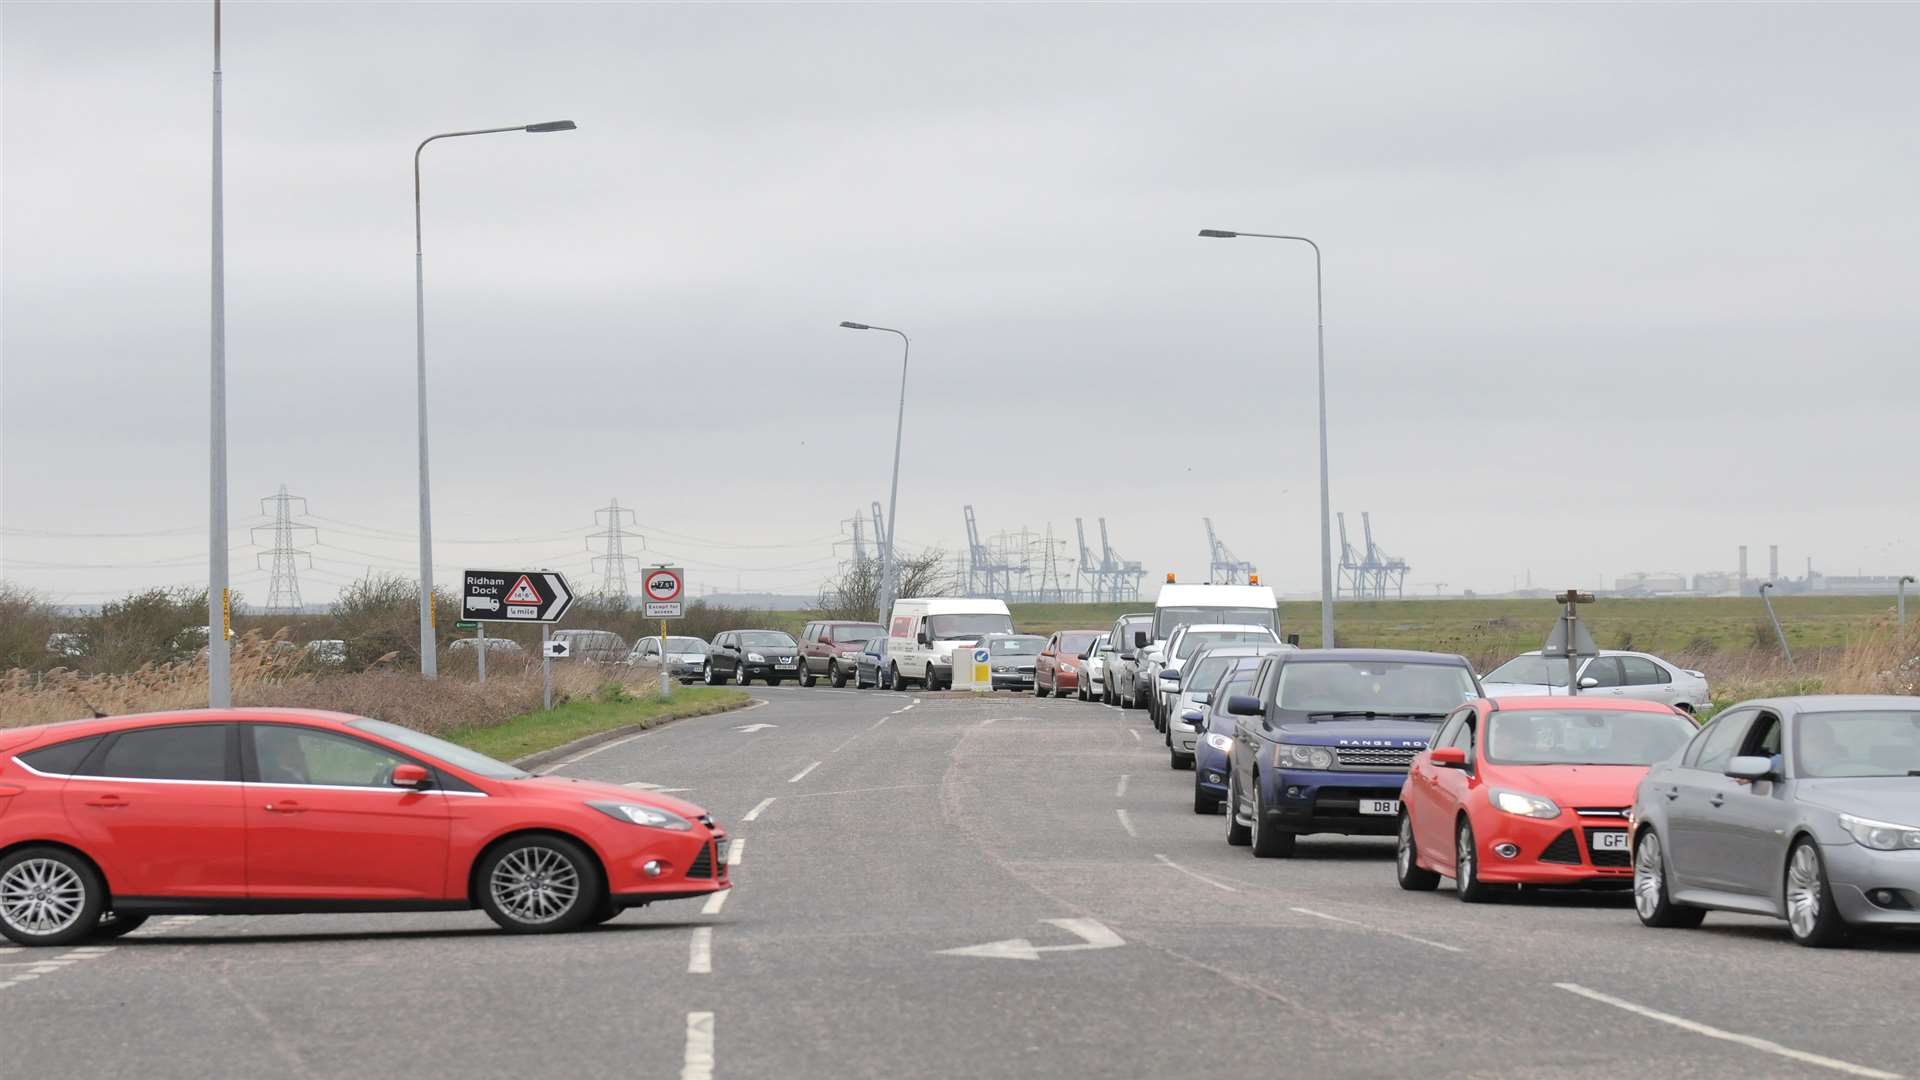 The queue of cars on the Old Ferry Road